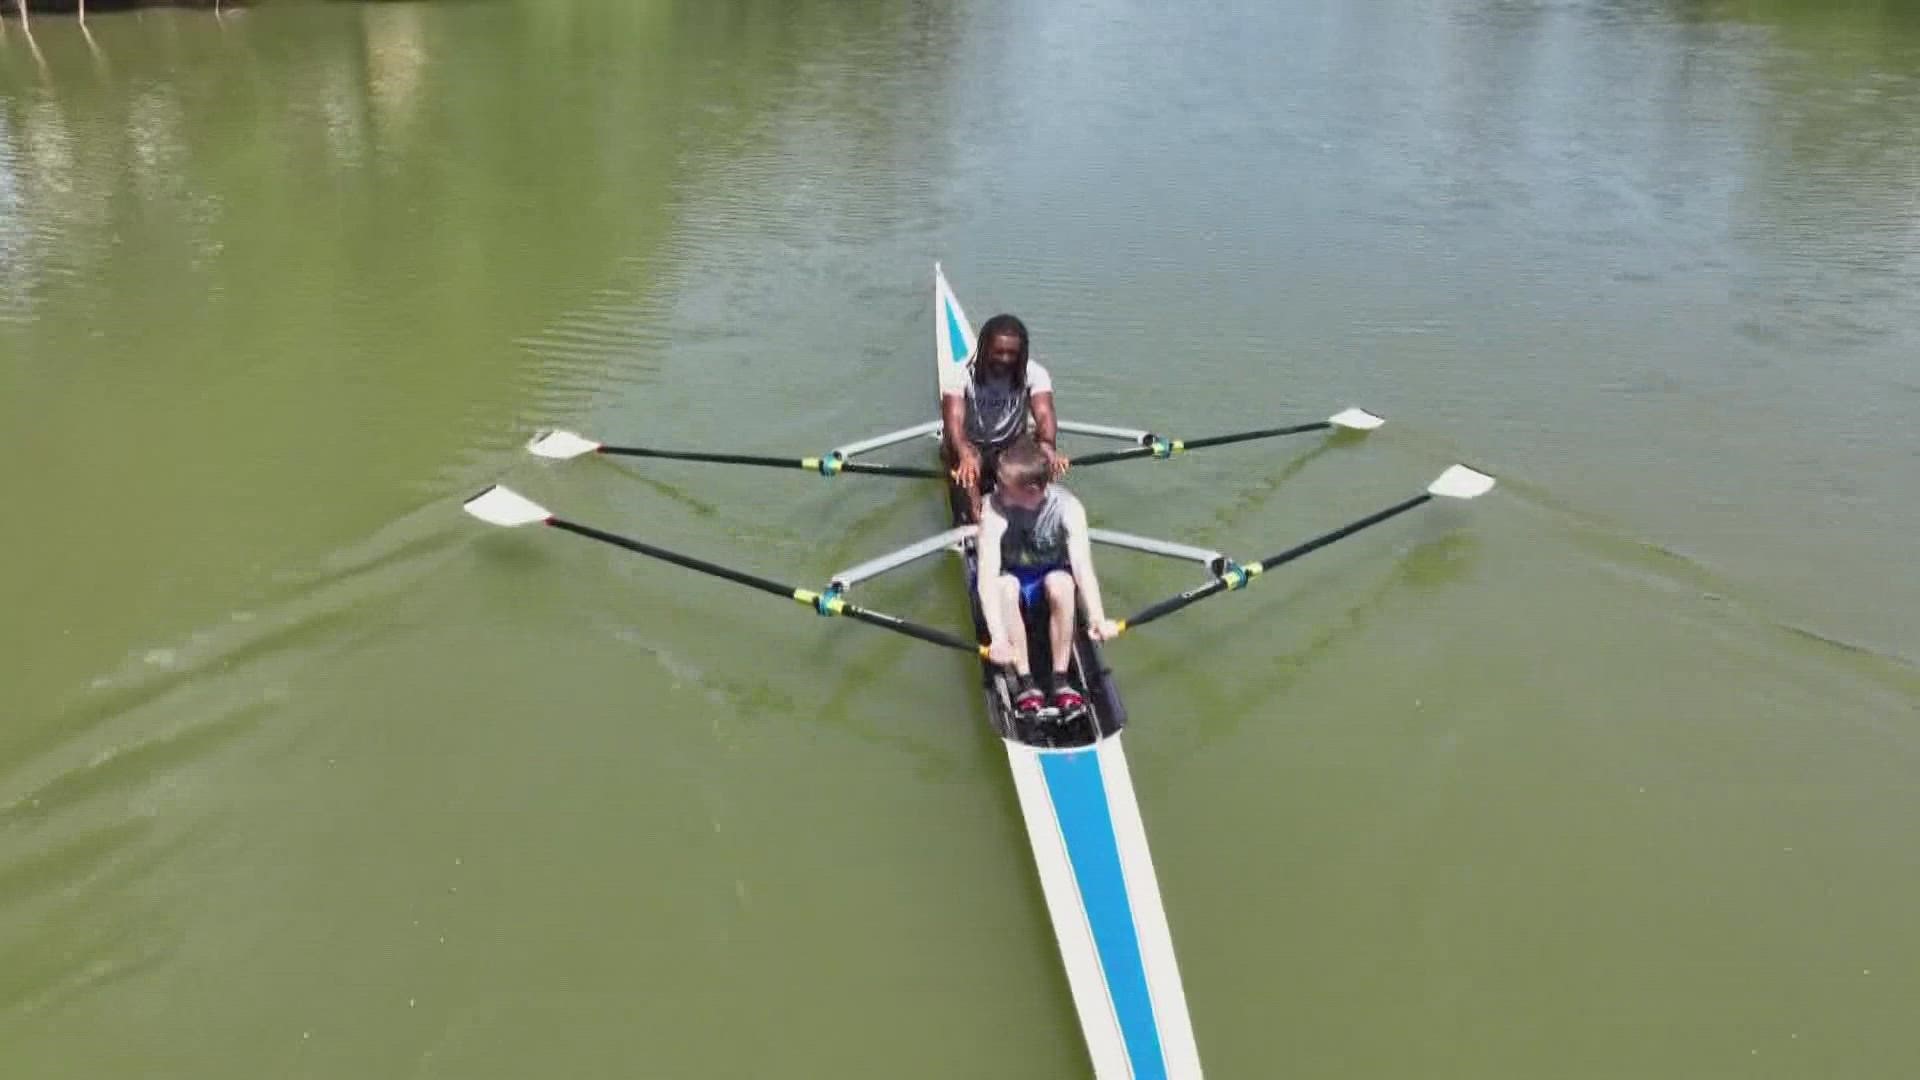 La Vega High School in Waco unveils a new program unlike others in the area—rowing—which will help build students' life skills and give them new opportunities.